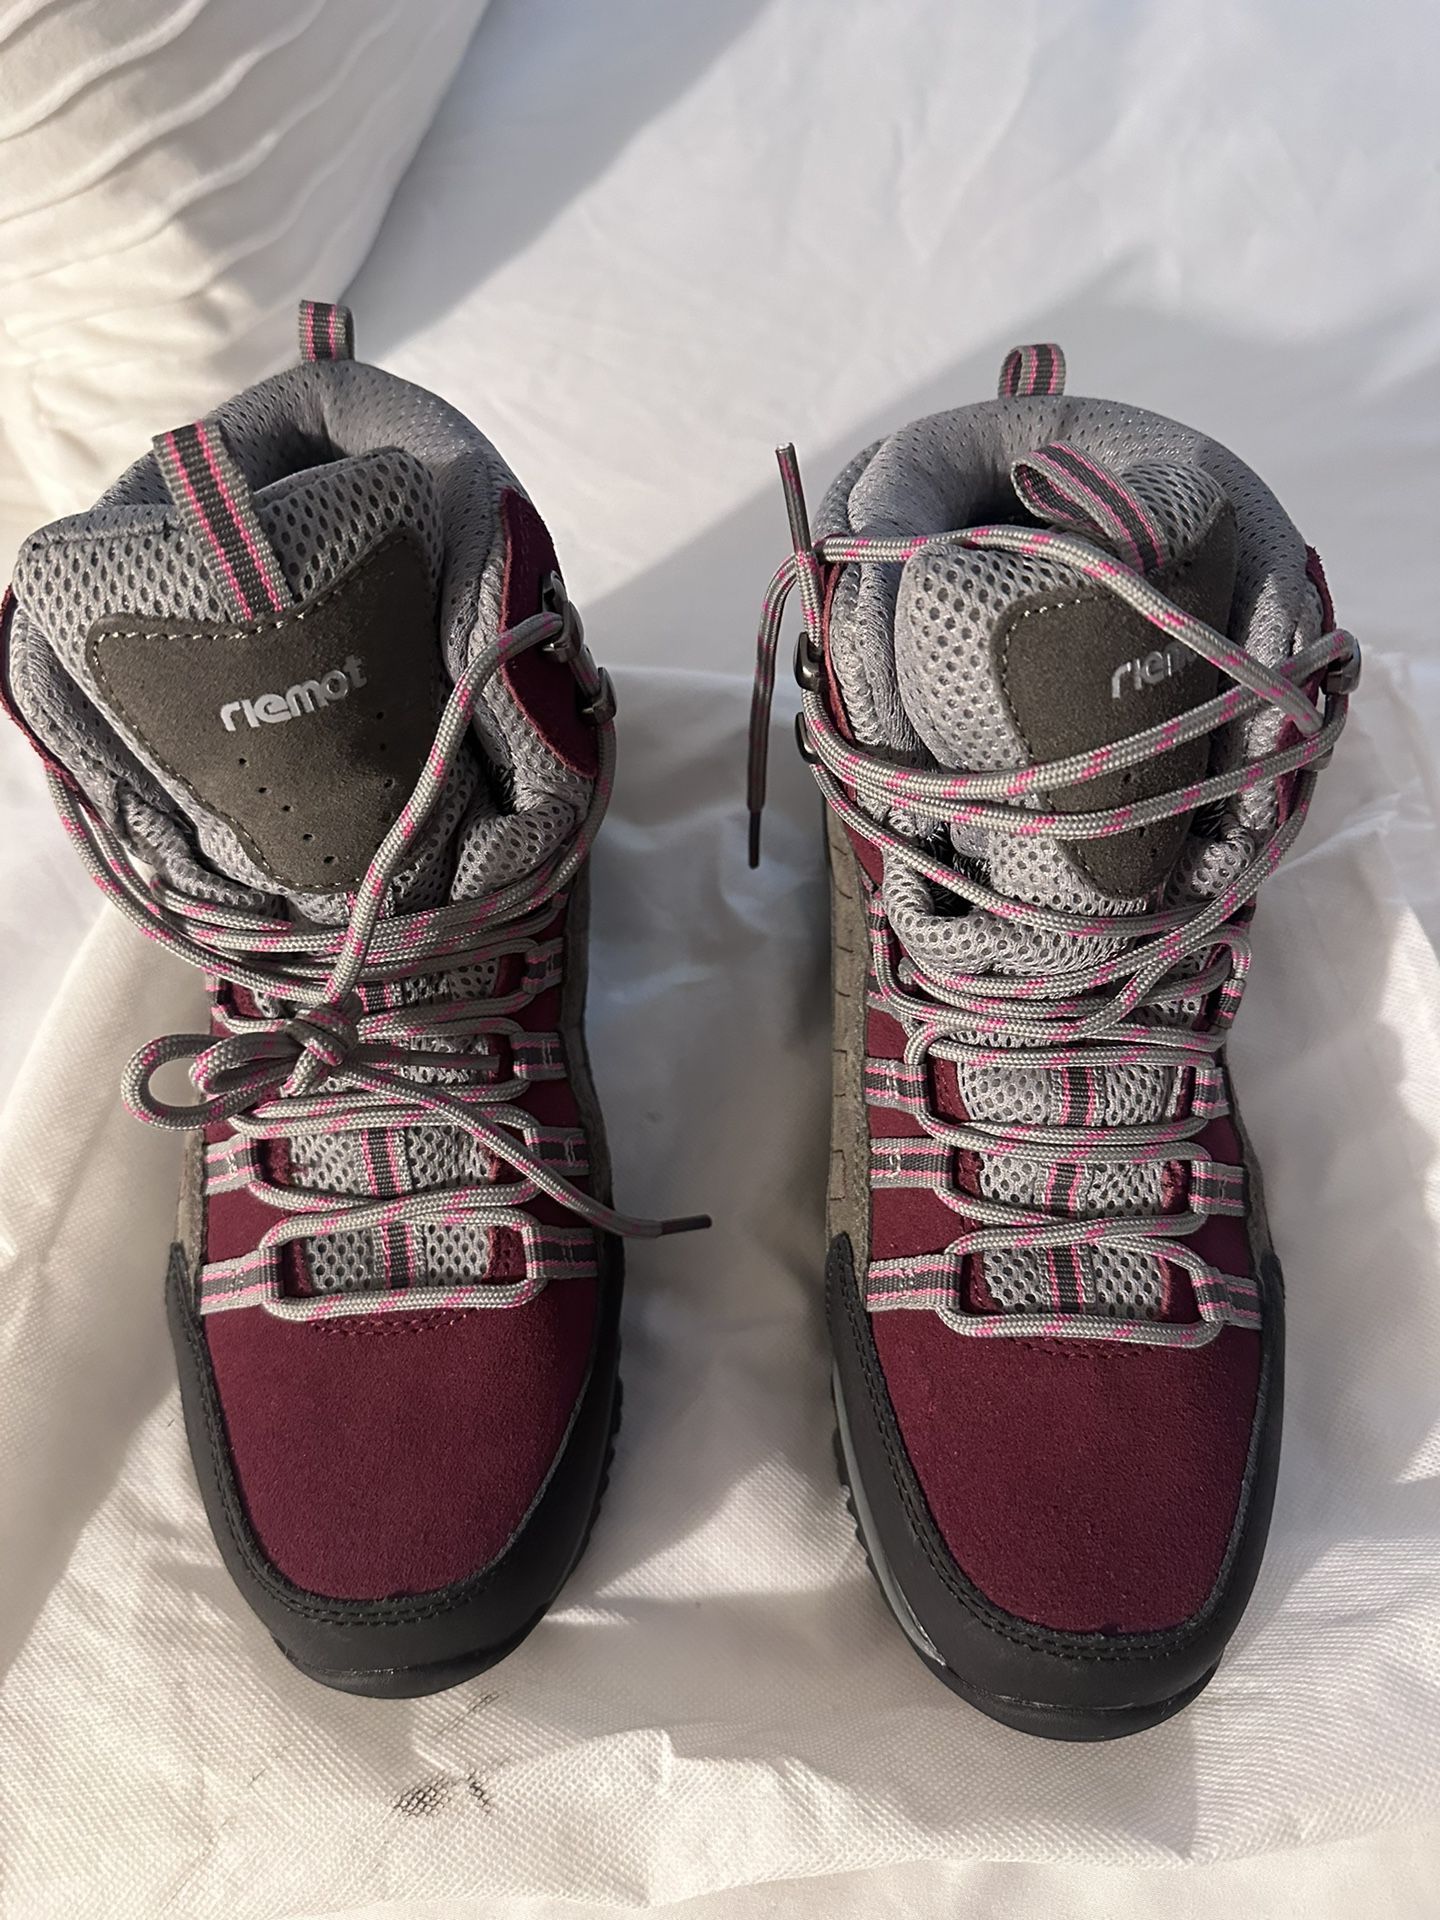 Women's Hiking Boots Size 7